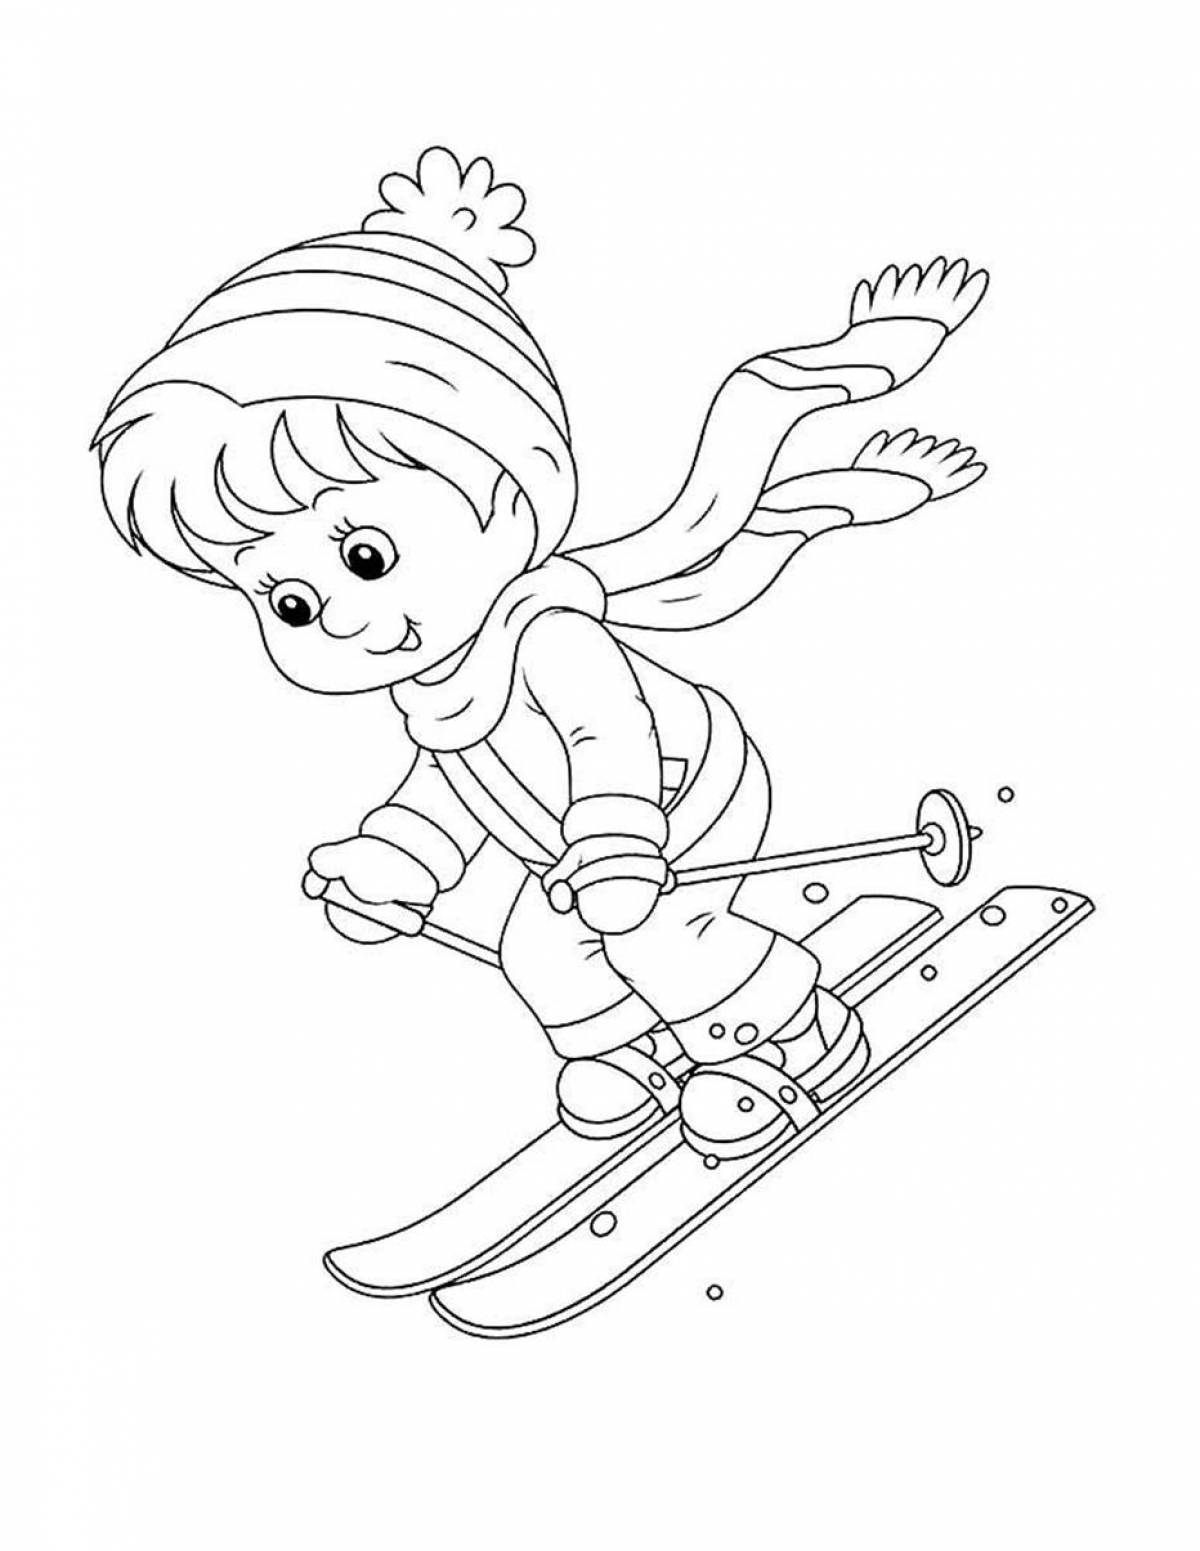 Inspiring coloring book for 3-4 year olds winter sports